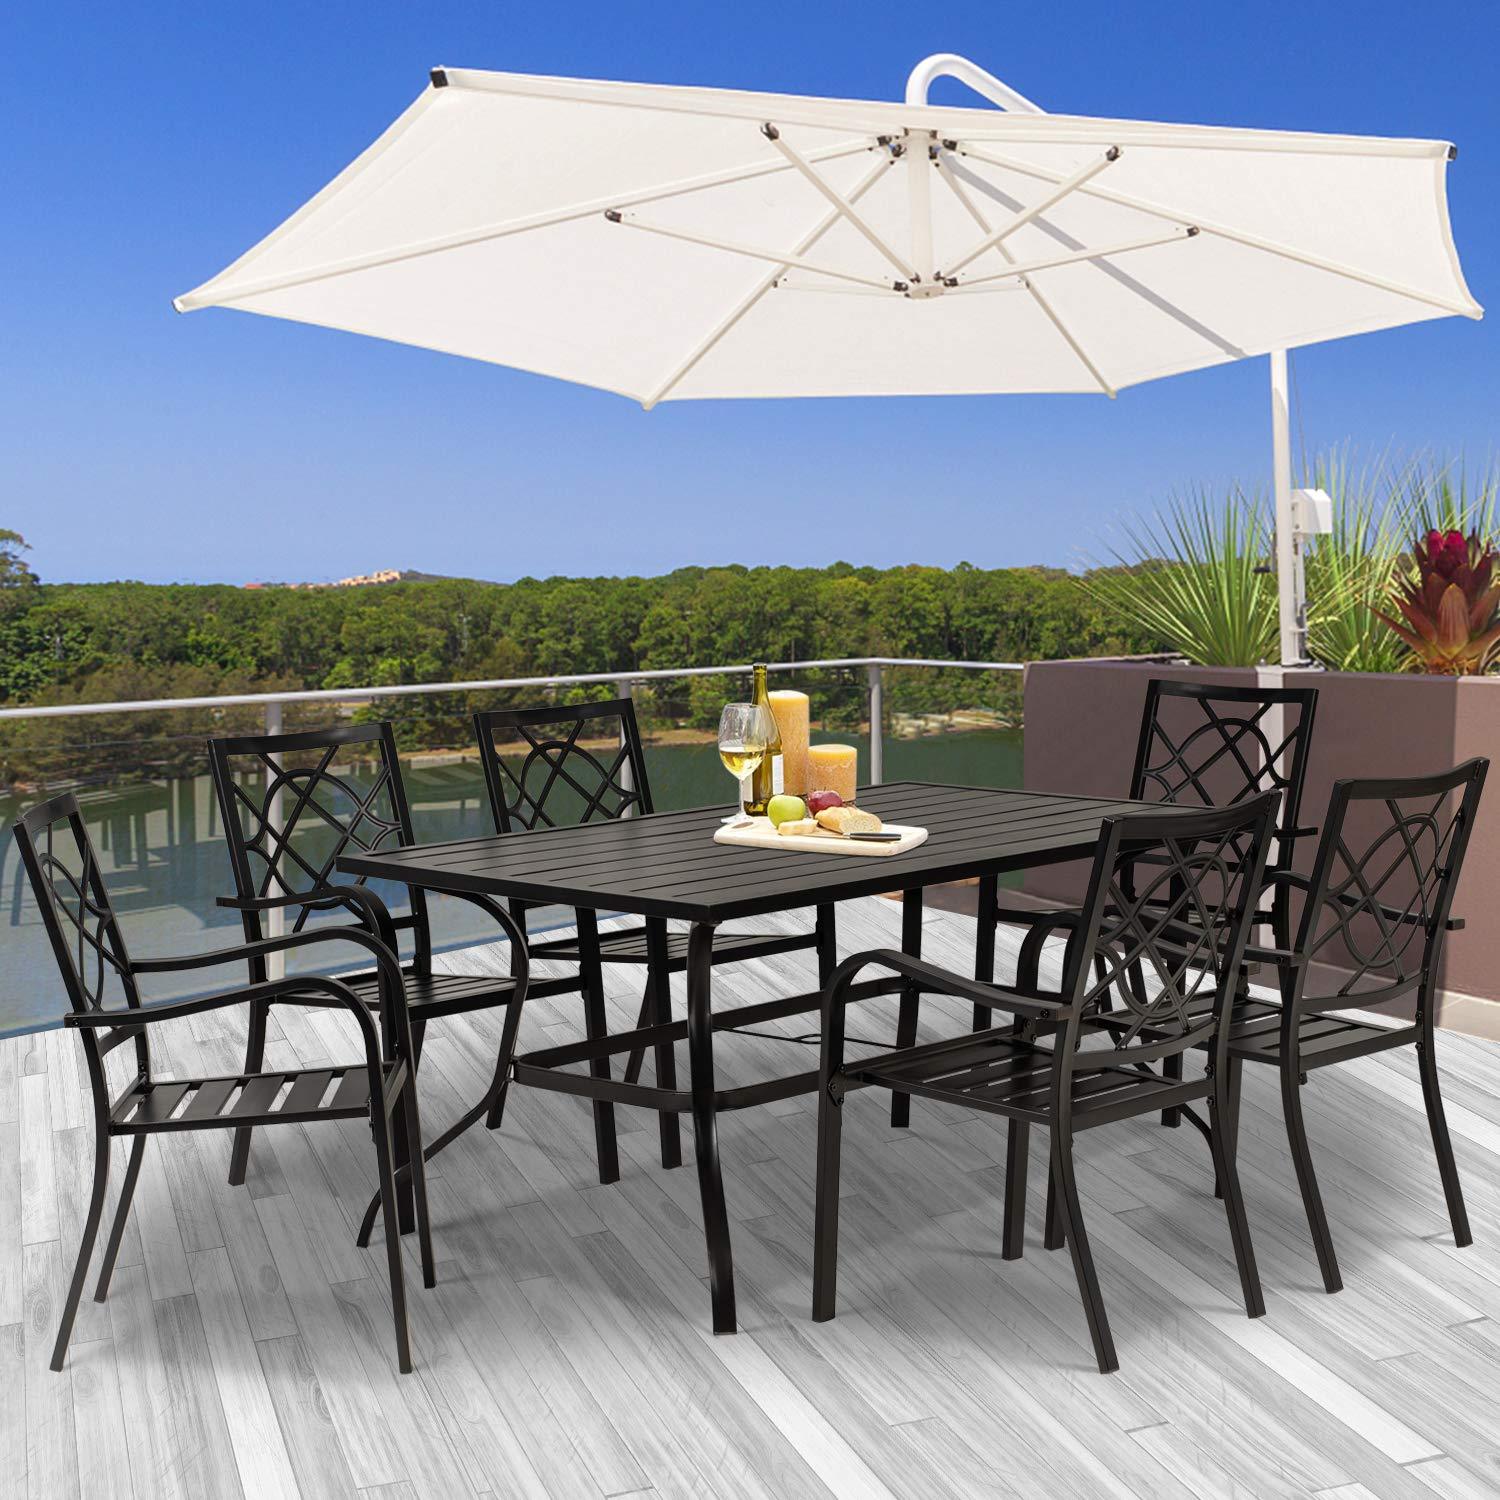 SOLAURA 7-Piece Outdoor Patio Dining Set, 6 Person Garden Dining Set Furniture with Slat Table Top/Backyard Stacked Chairs, 1.57" Umbrella Hole (Black) - CookCave